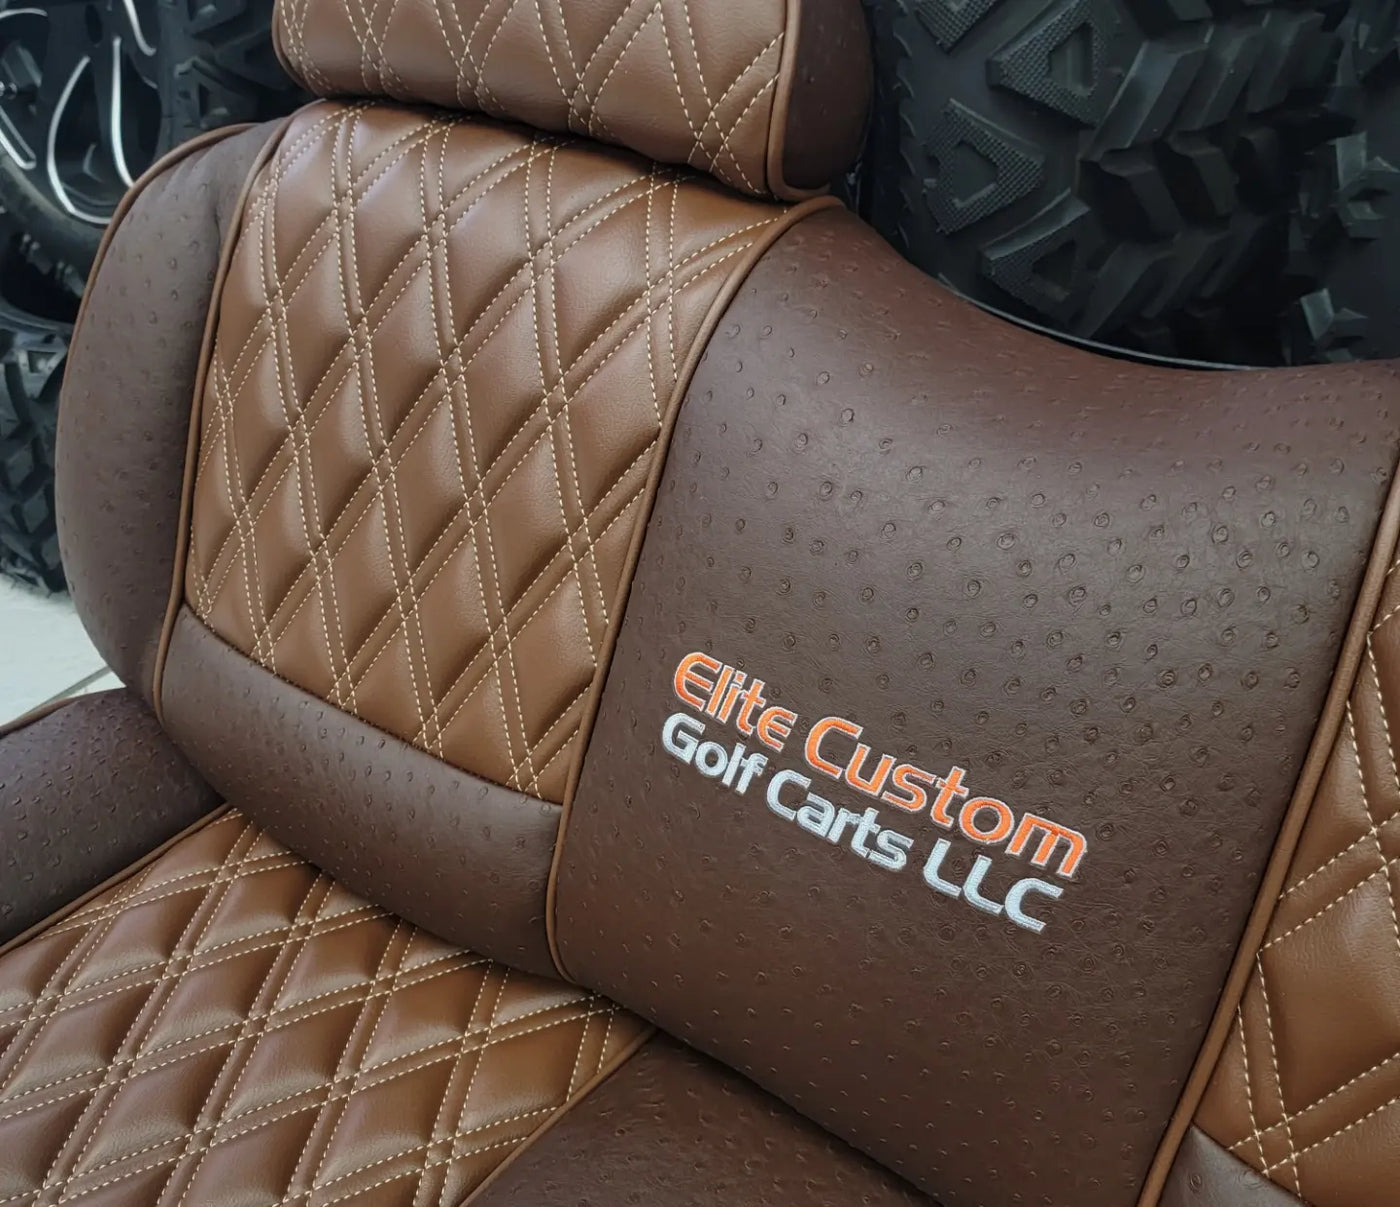 Lazy Life Evolution EV Golf Cart Premium Seats fits Evolutions Classic Pro & Plus and Forester Models